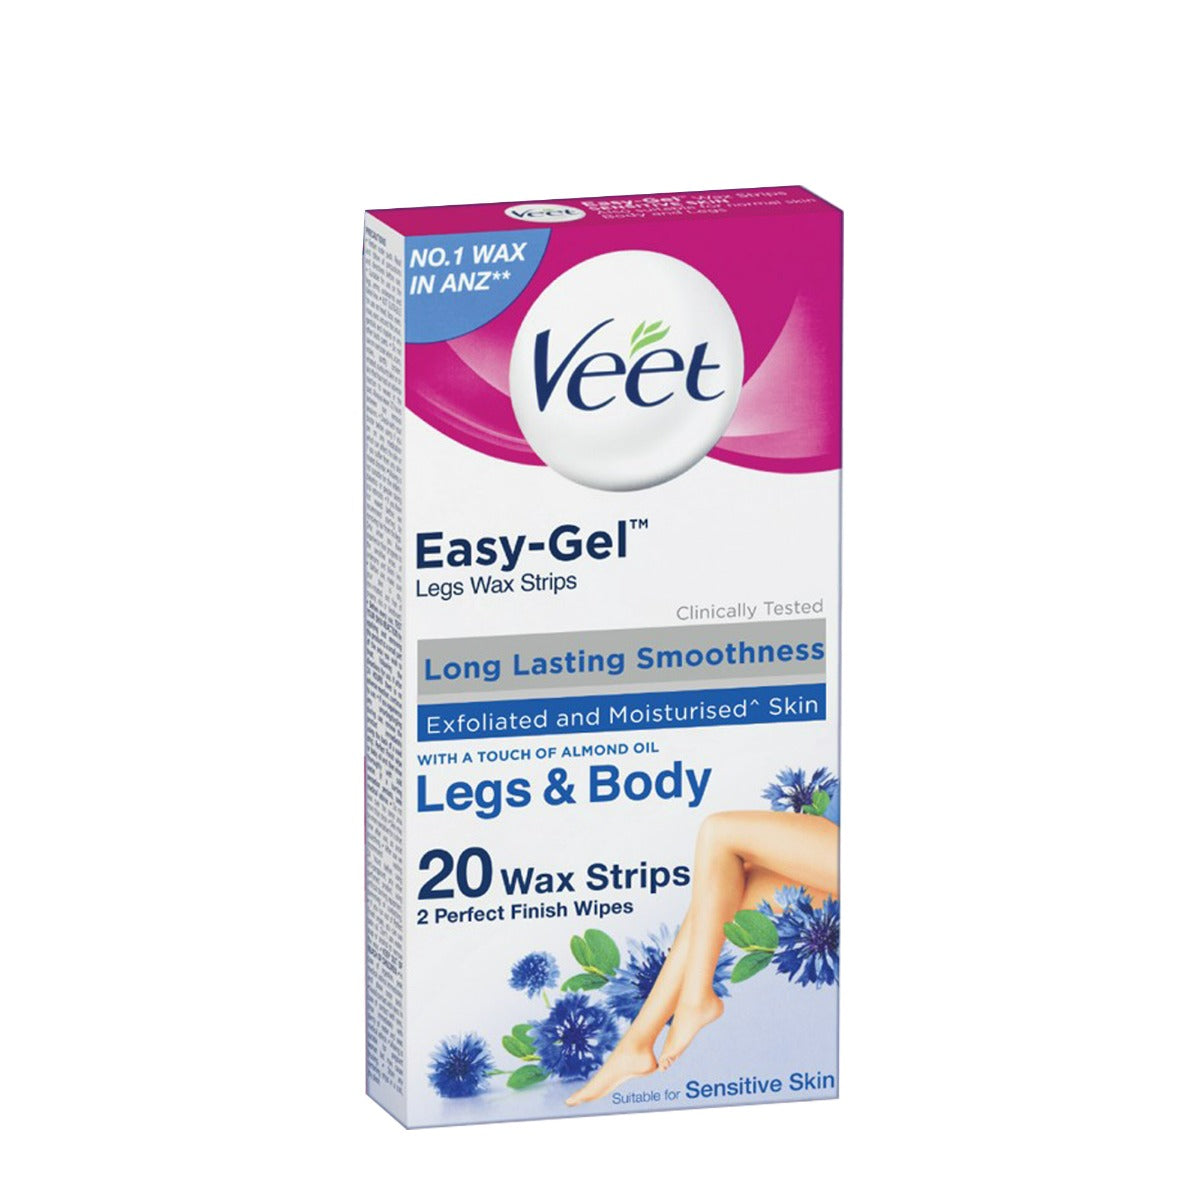 Veet Easy Gel Legs and Body Wax Strips For Long-Lasting Smoothness Sensitive Skin - 20pcs